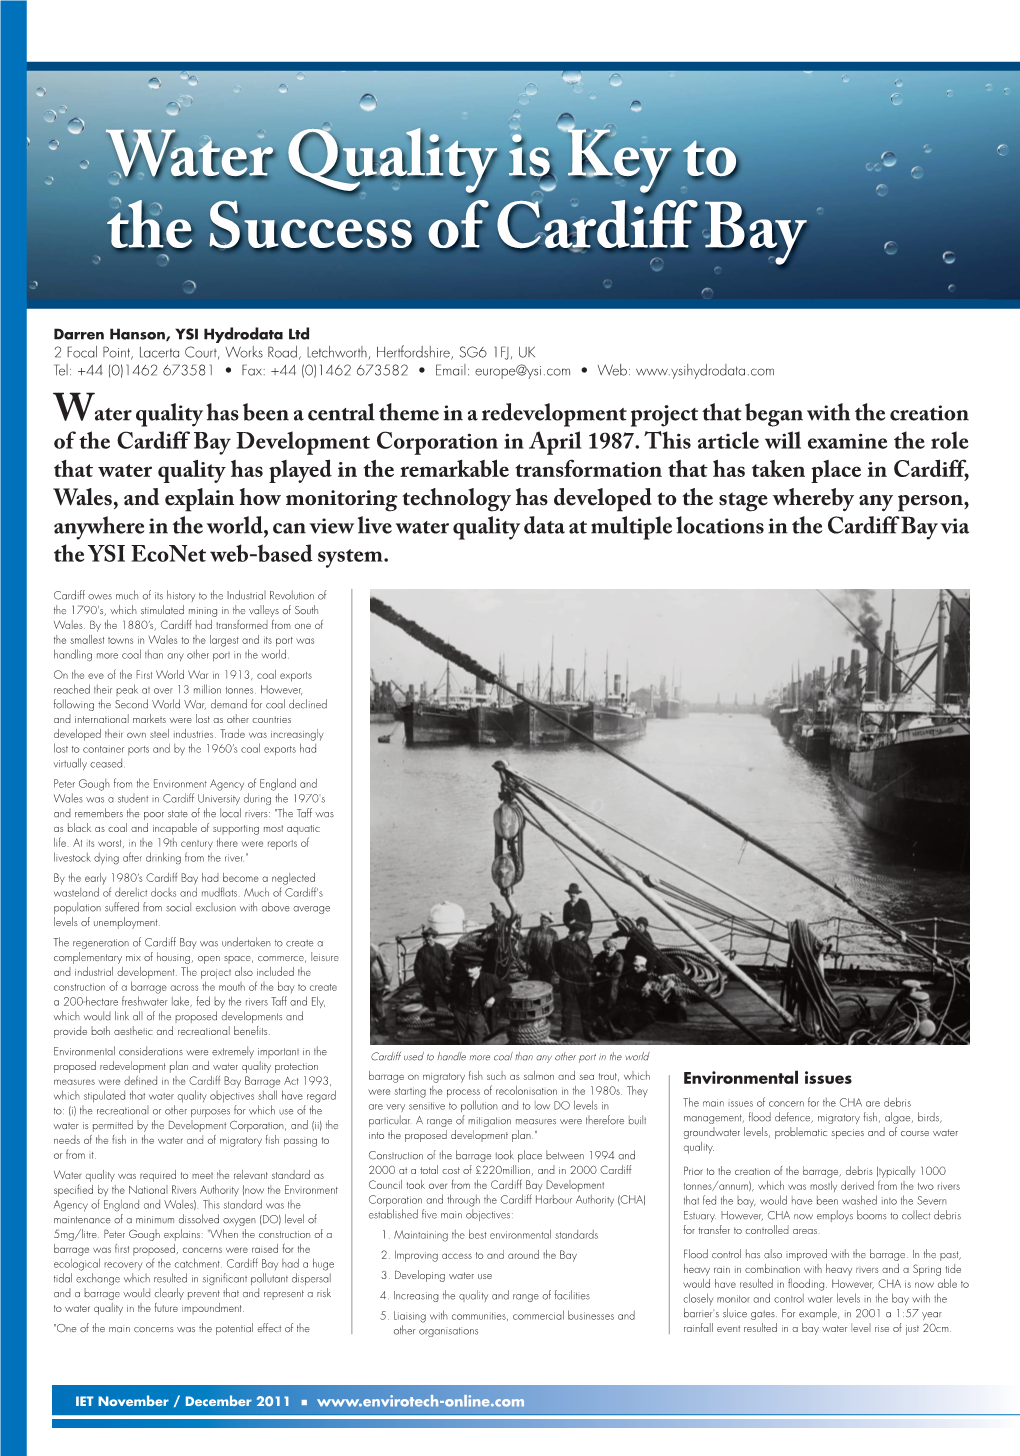 Water Quality Is Key to the Success of Cardiff Bay